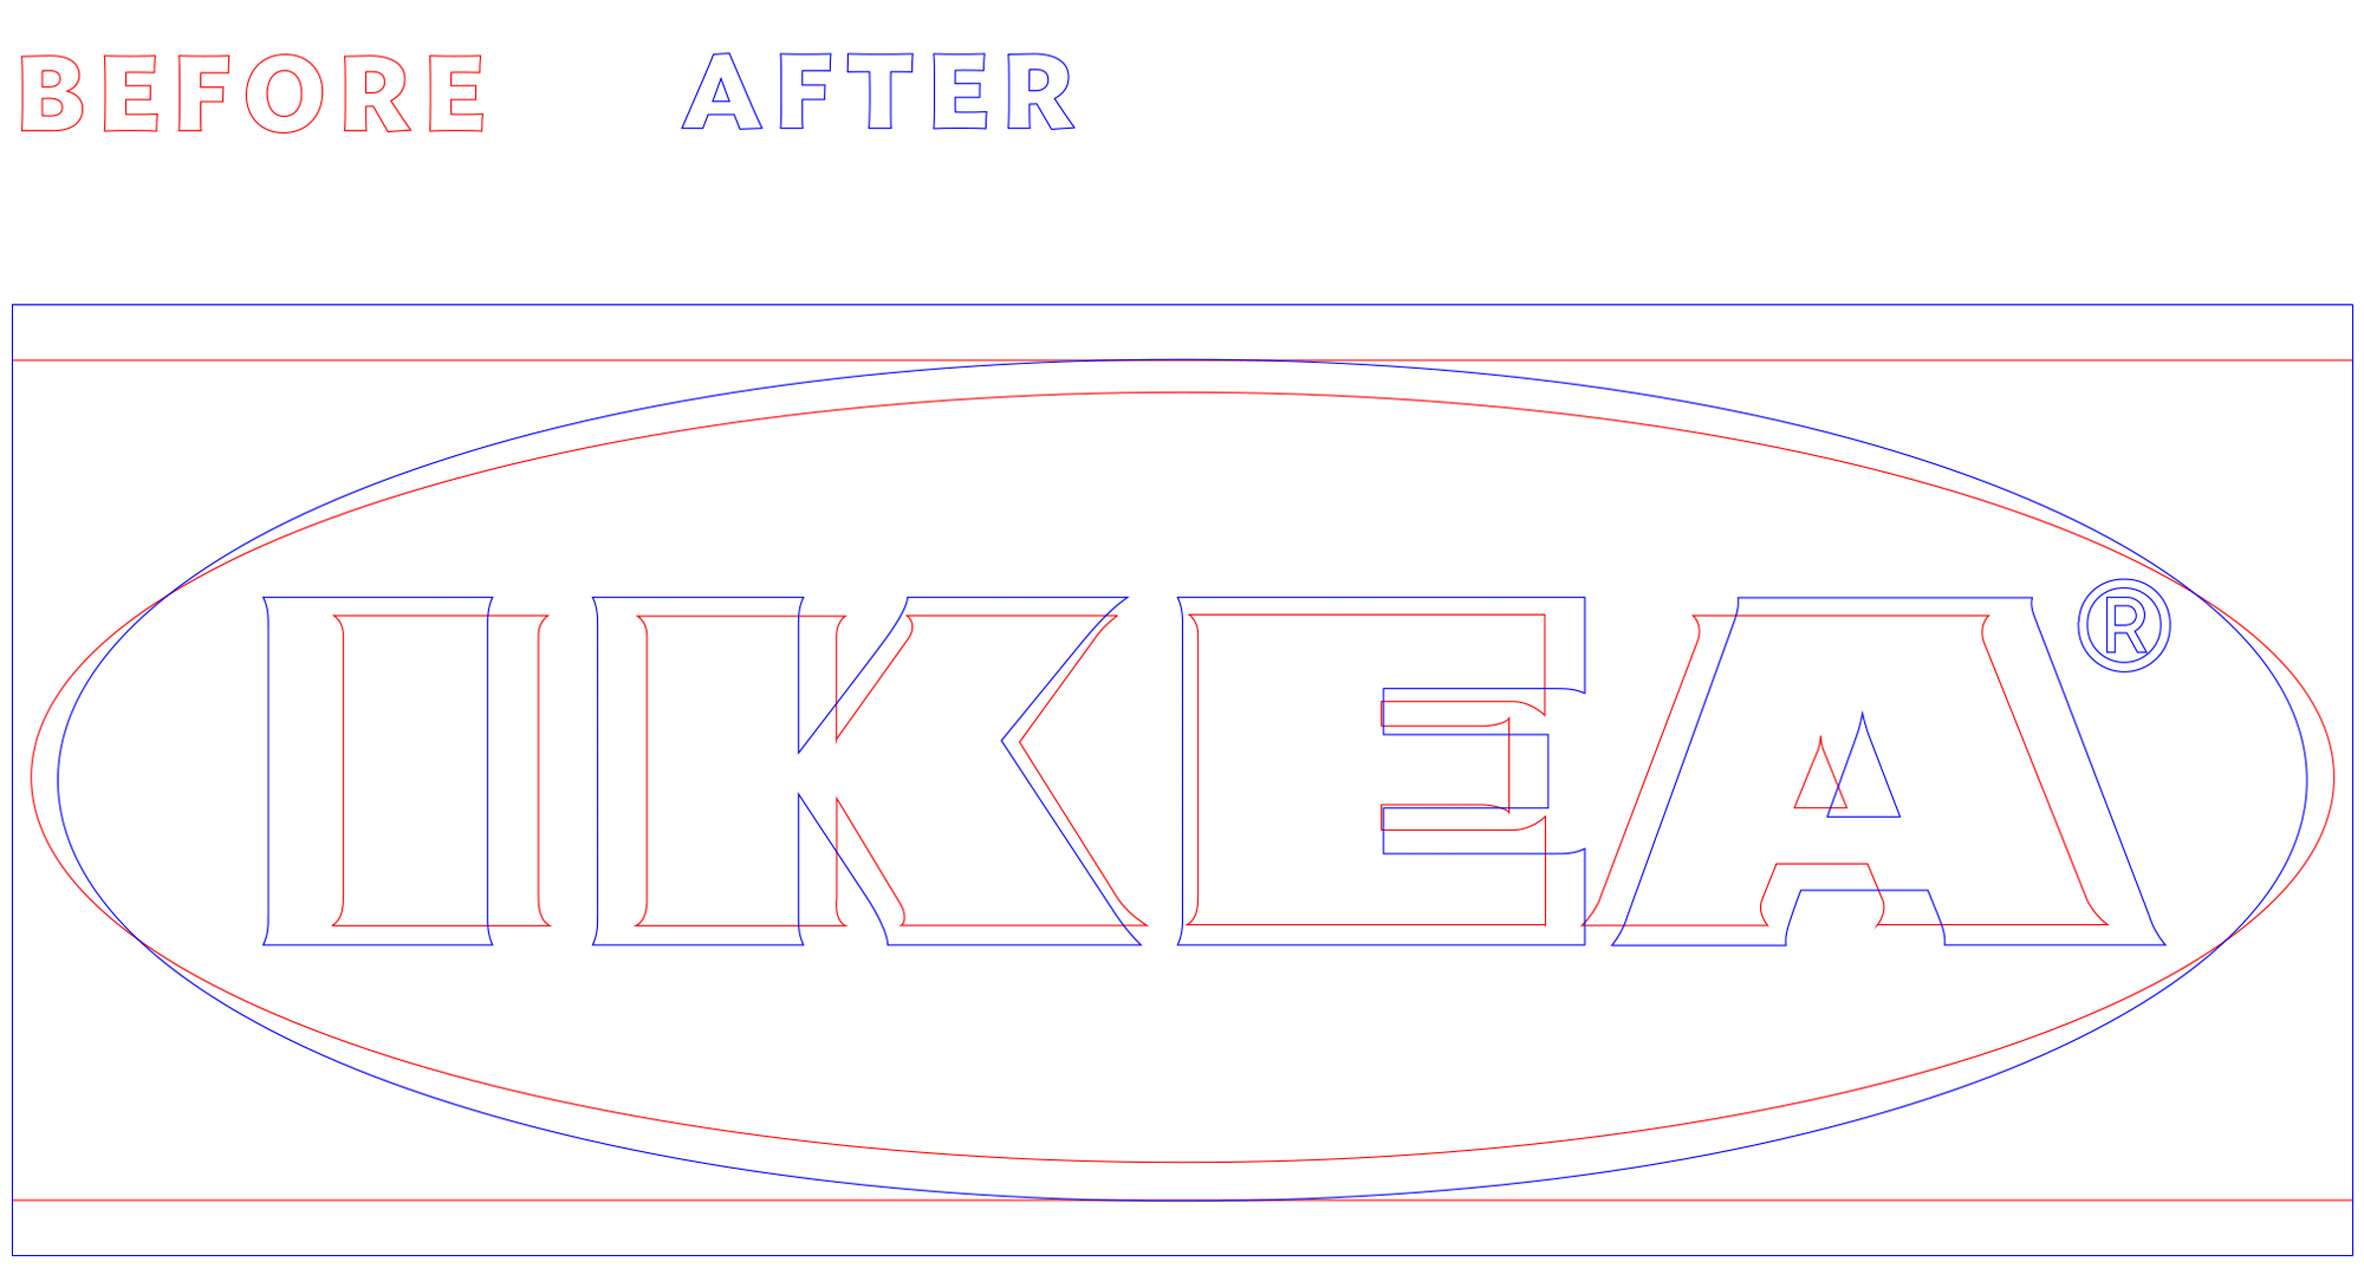 Seventy Agency "future proofs" IKEA's iconic blue and yellow logo